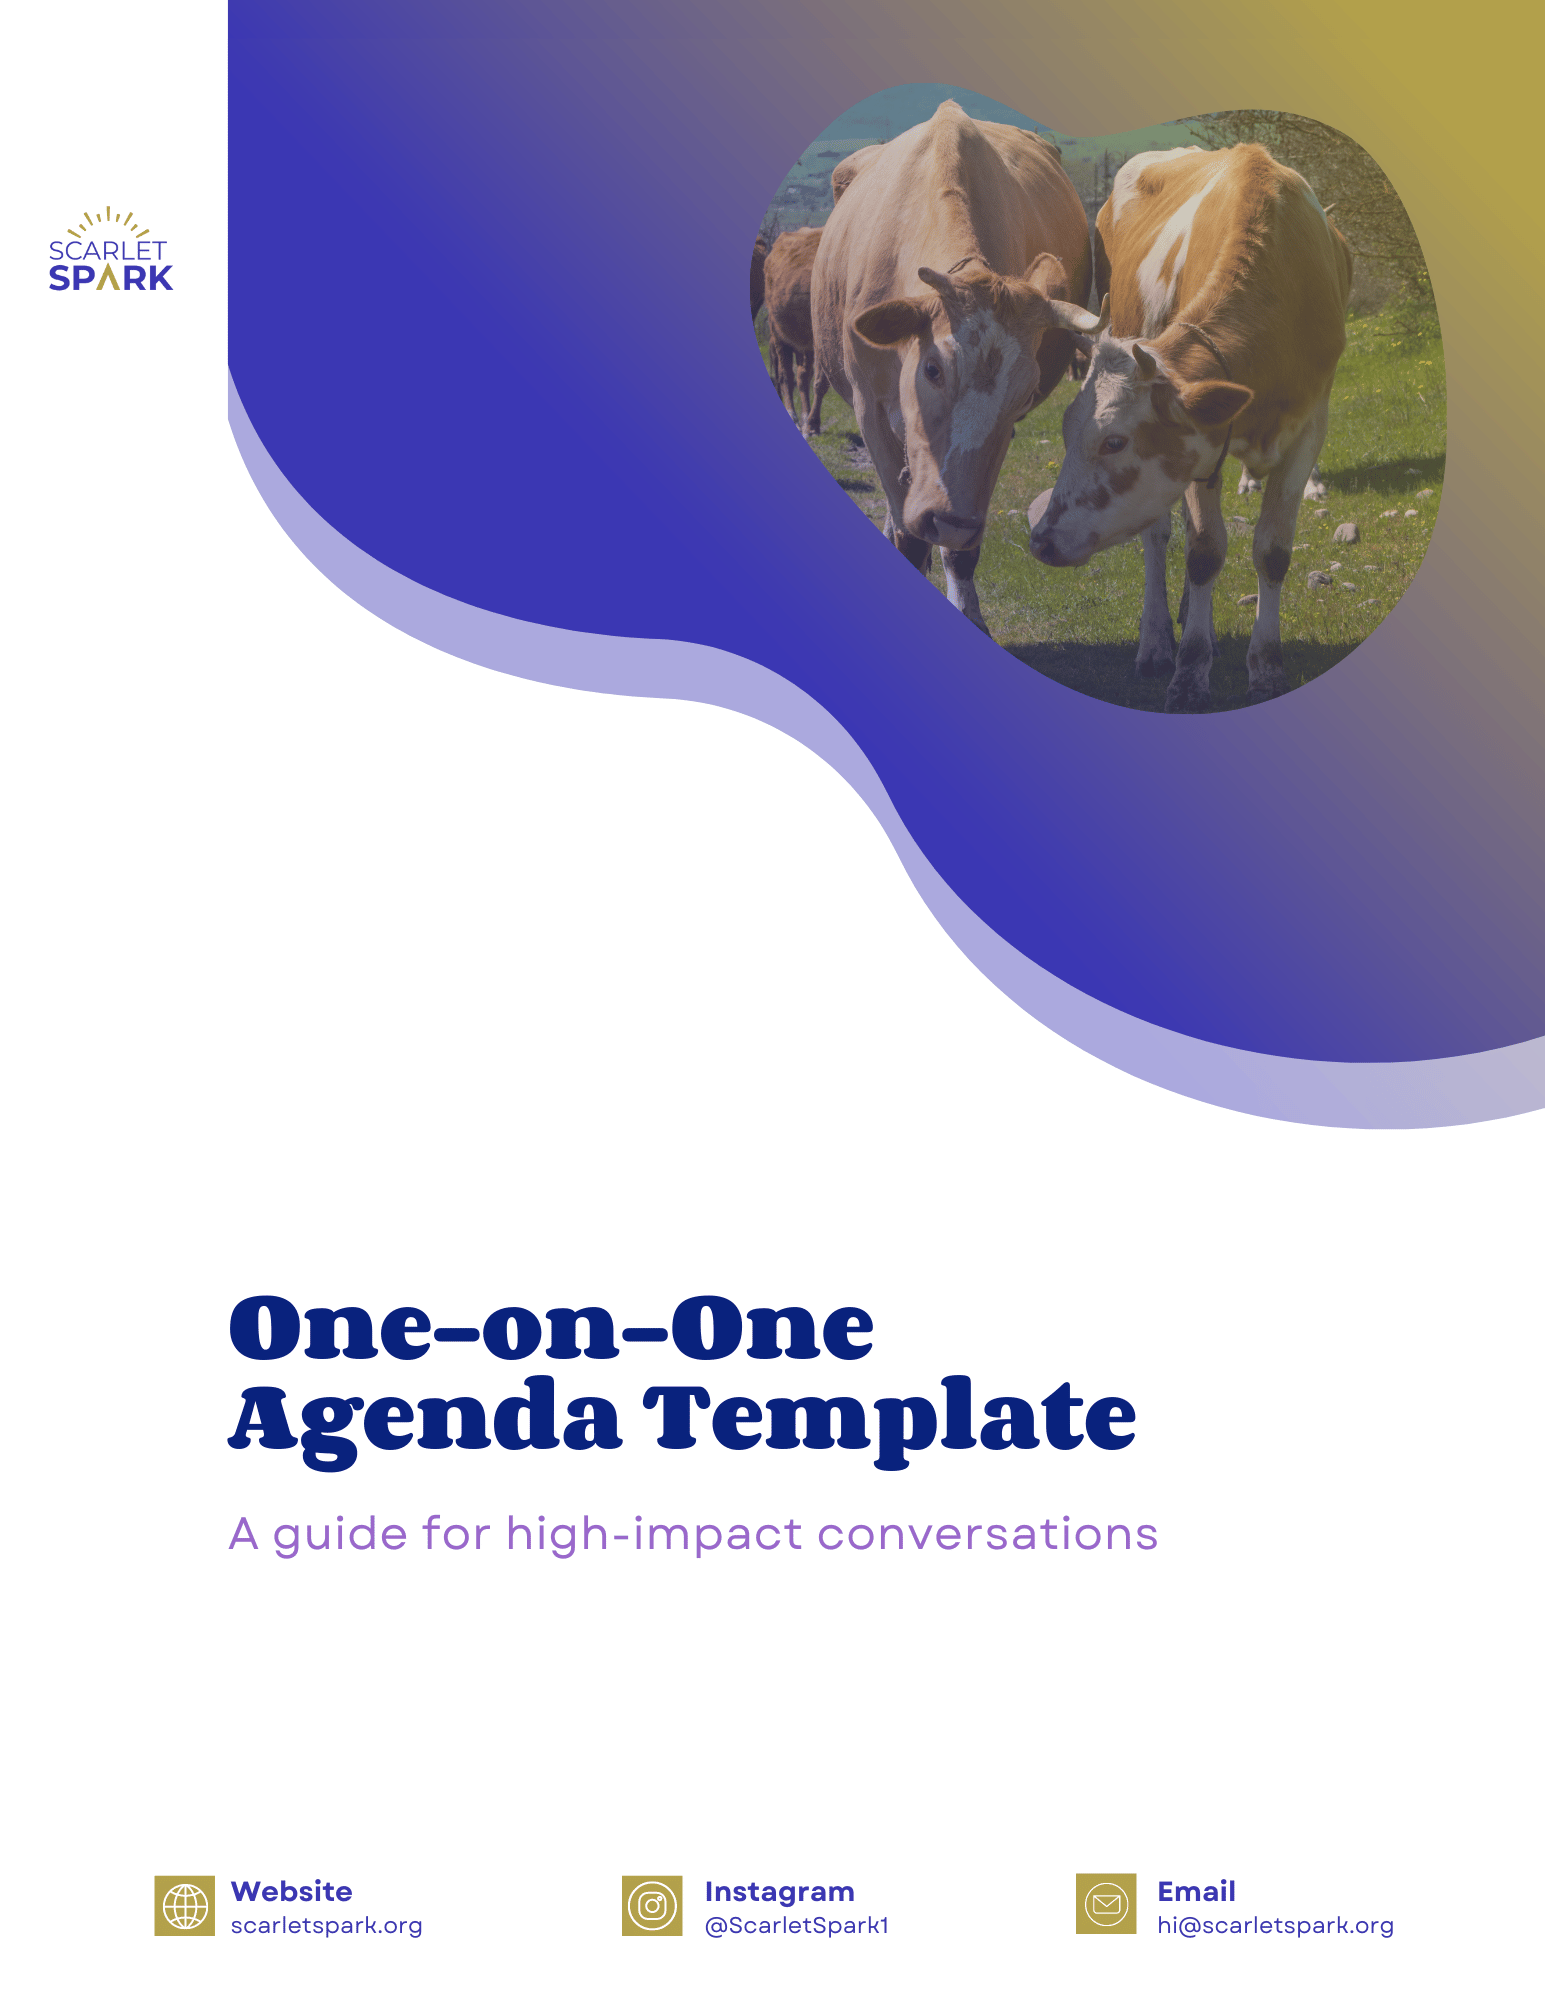 One-on-one Agenda Template Cover Image with two cows looking at one another